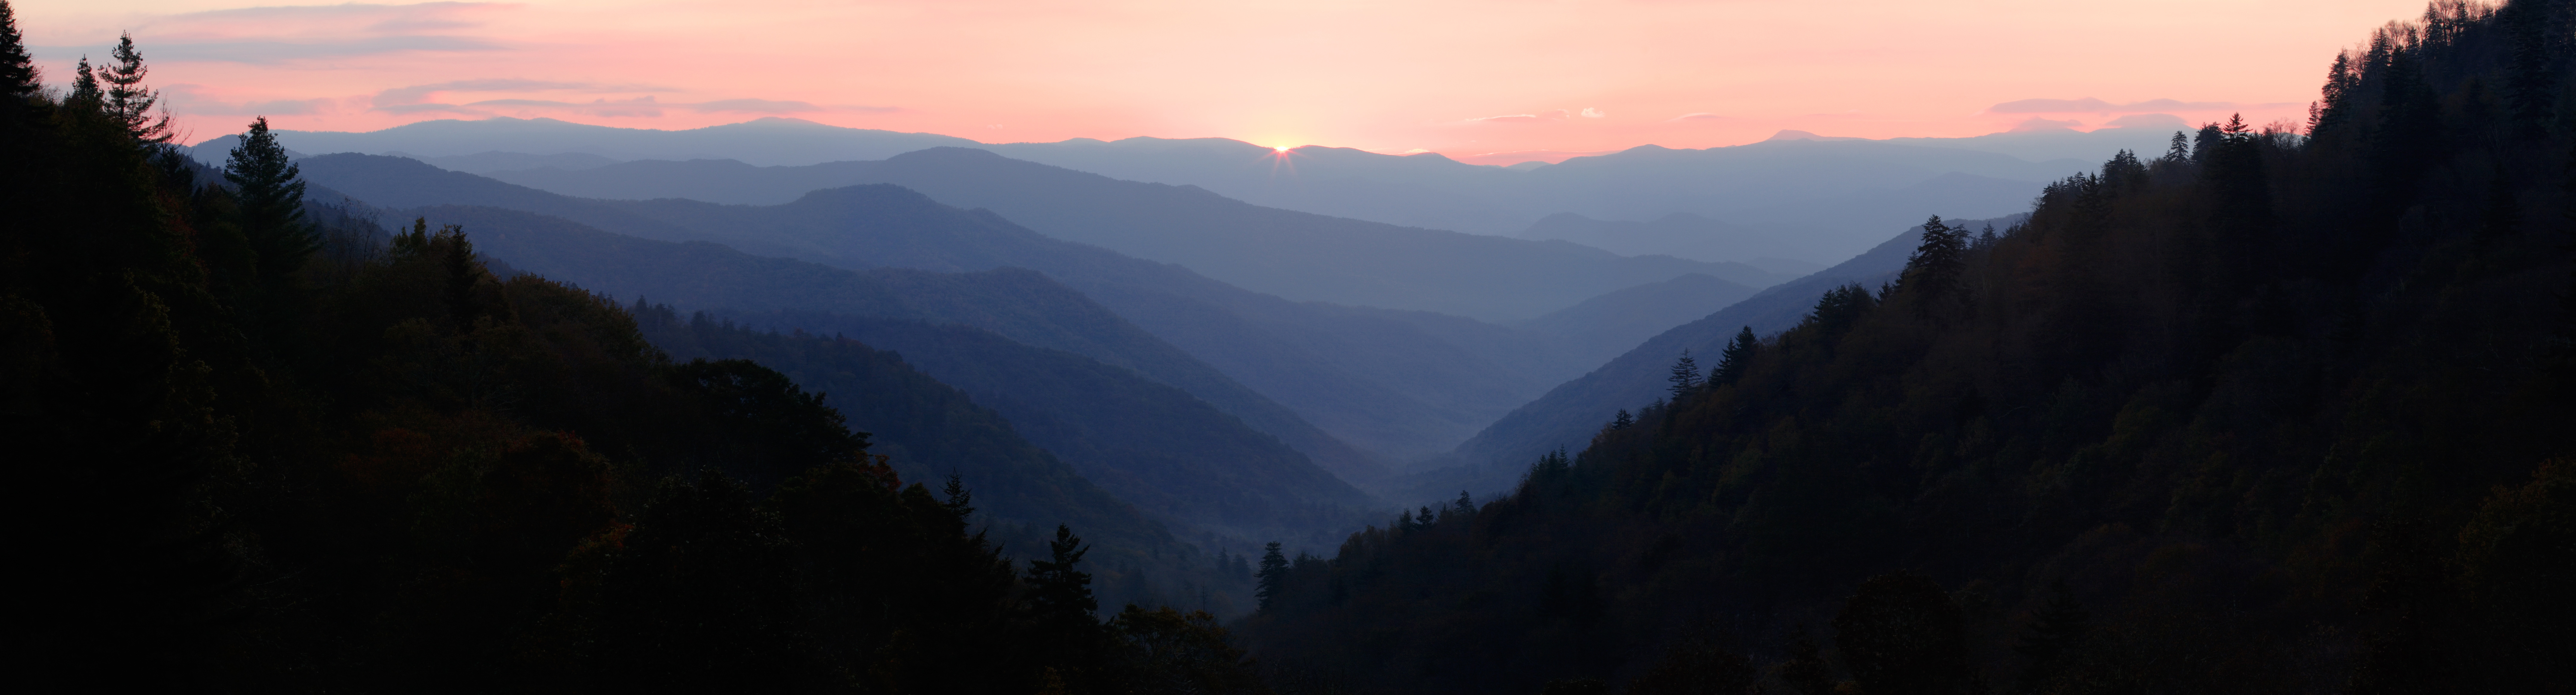 First Sun Light over Mountain Valley - Panorama.  Smoky Mountains National Park, Tennessee